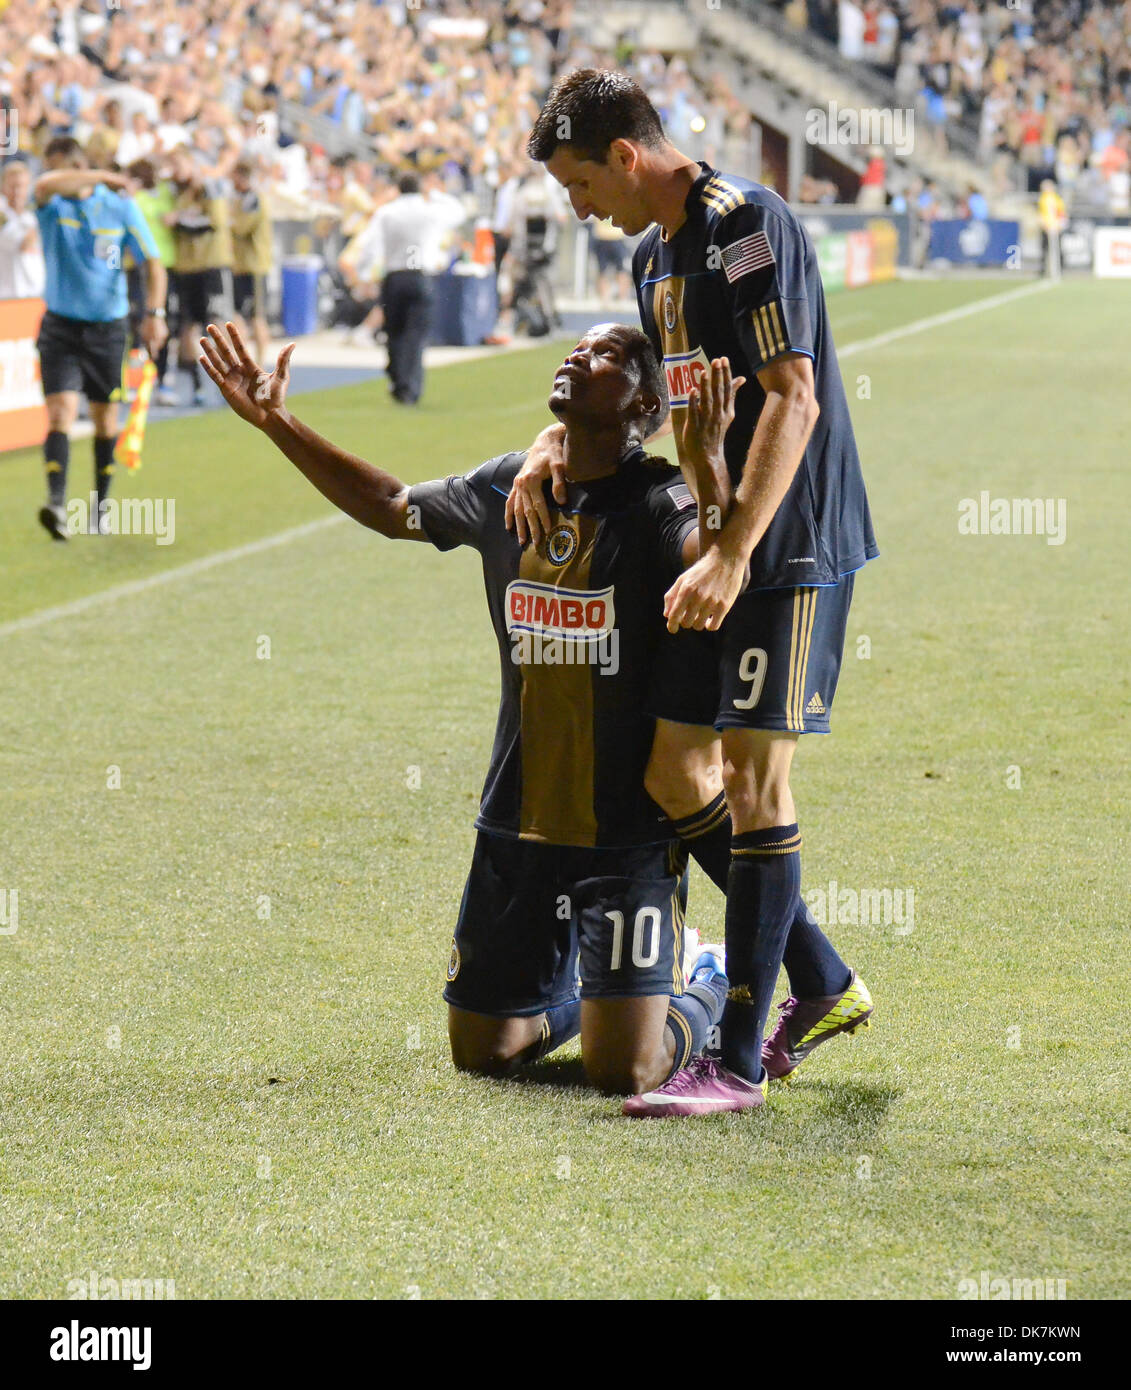 June 25, 2011 - Chester, PA, USA - Philadelphia Union FW, DANNY MWANGA, looks to the heavens in celebration with SEBASTIEN LE TOUX after scoring the winning goal for the Union. The Union played Chivas USA at PPL Park in Chester Pa. The Union won the match 3-2. (Credit Image: © Ricky Fitchett/ZUMAPRESS.com) Stock Photo